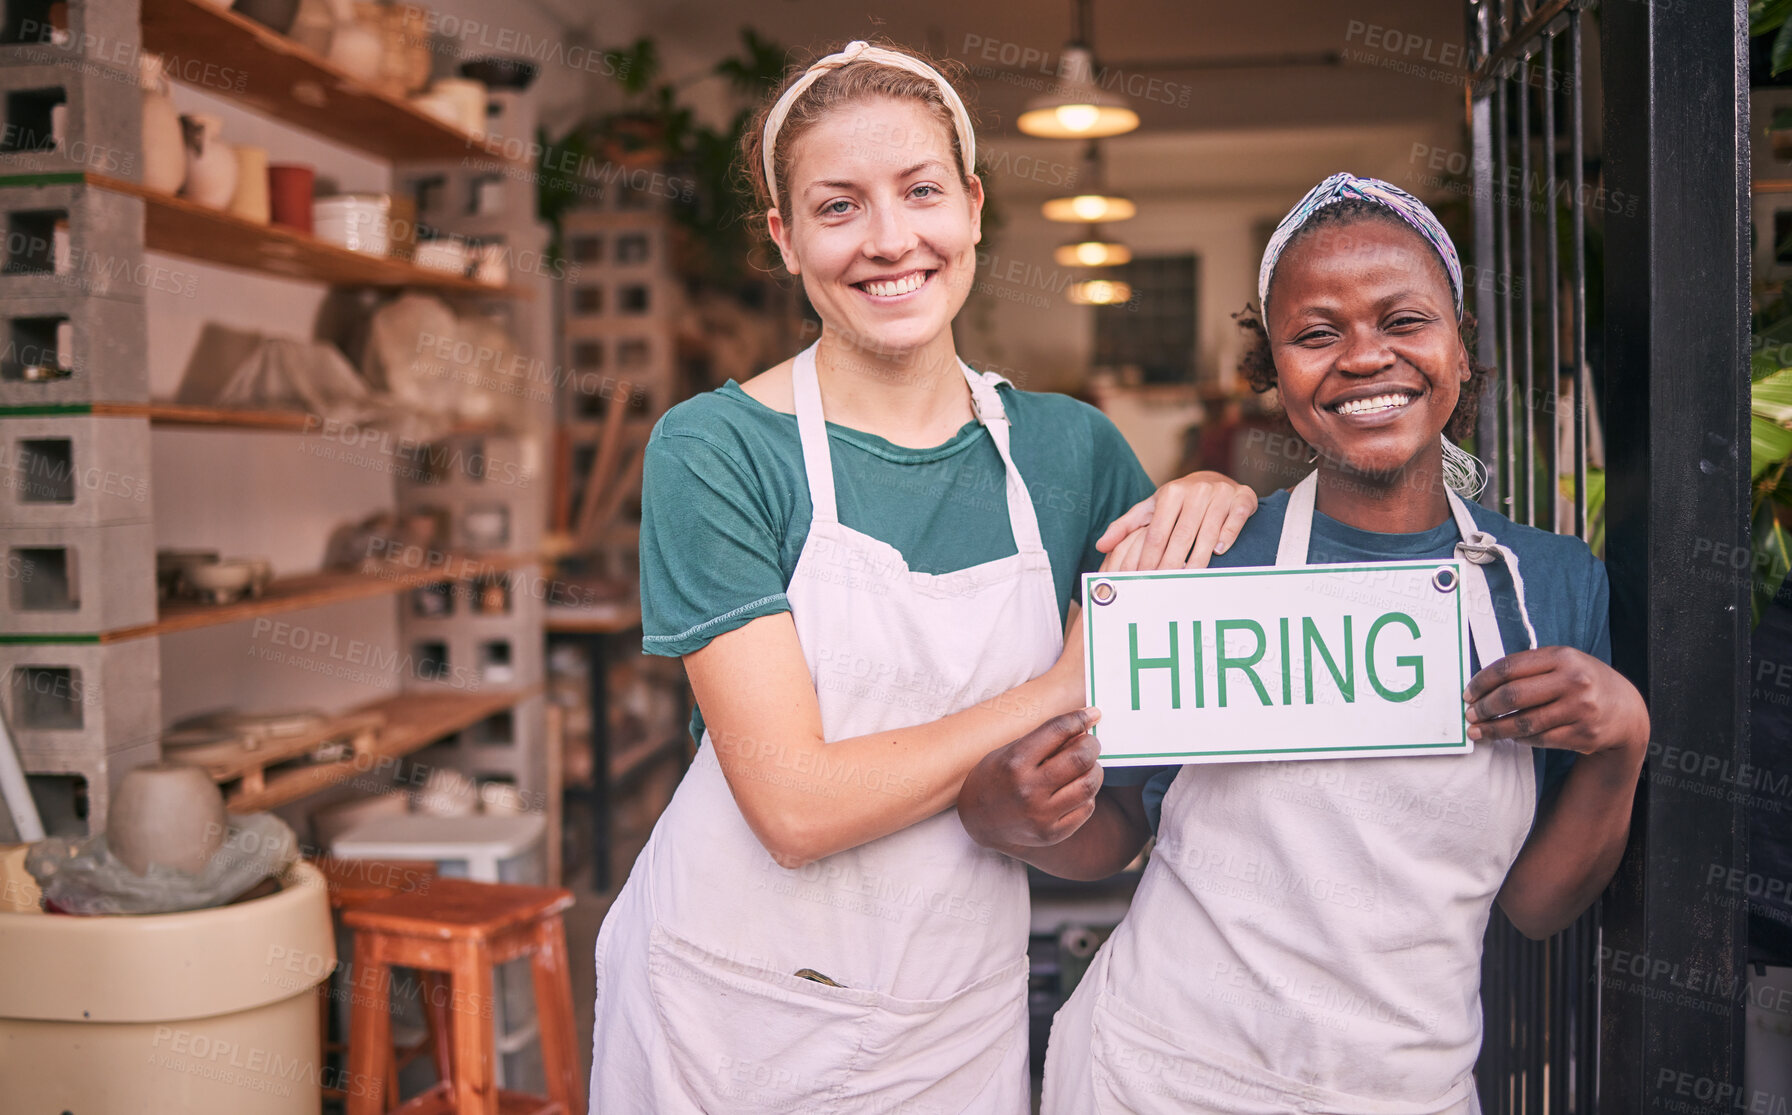 Buy stock photo Hiring sign, portrait and people or business owner in diversity recruitment, career opportunity or store offer. Black woman, partner and retail startup, onboarding goals or poster for job application